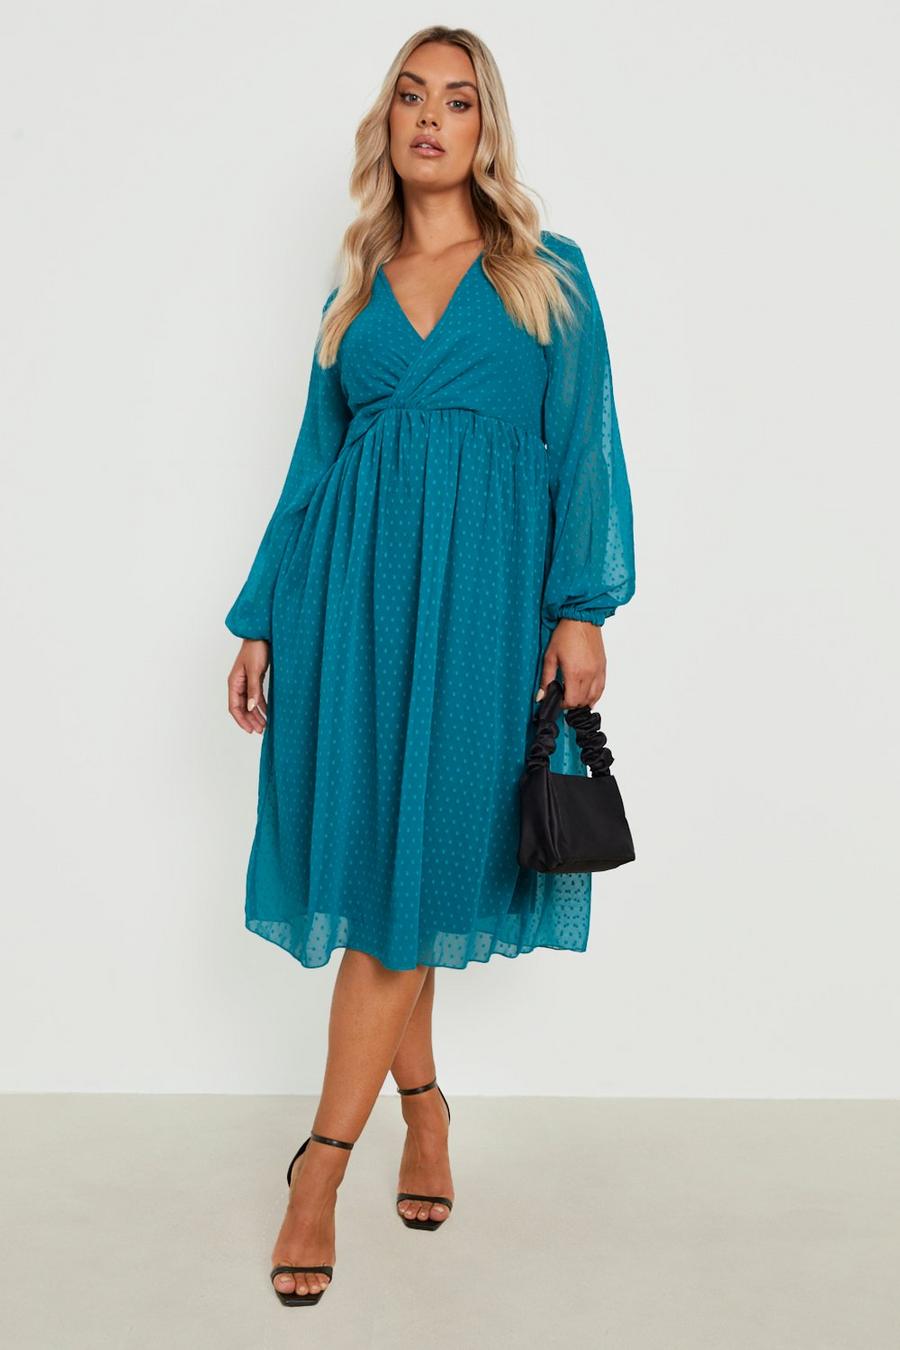 Boohoo Plus Size Haul Featuring Summer Dresses For Curvy Women 